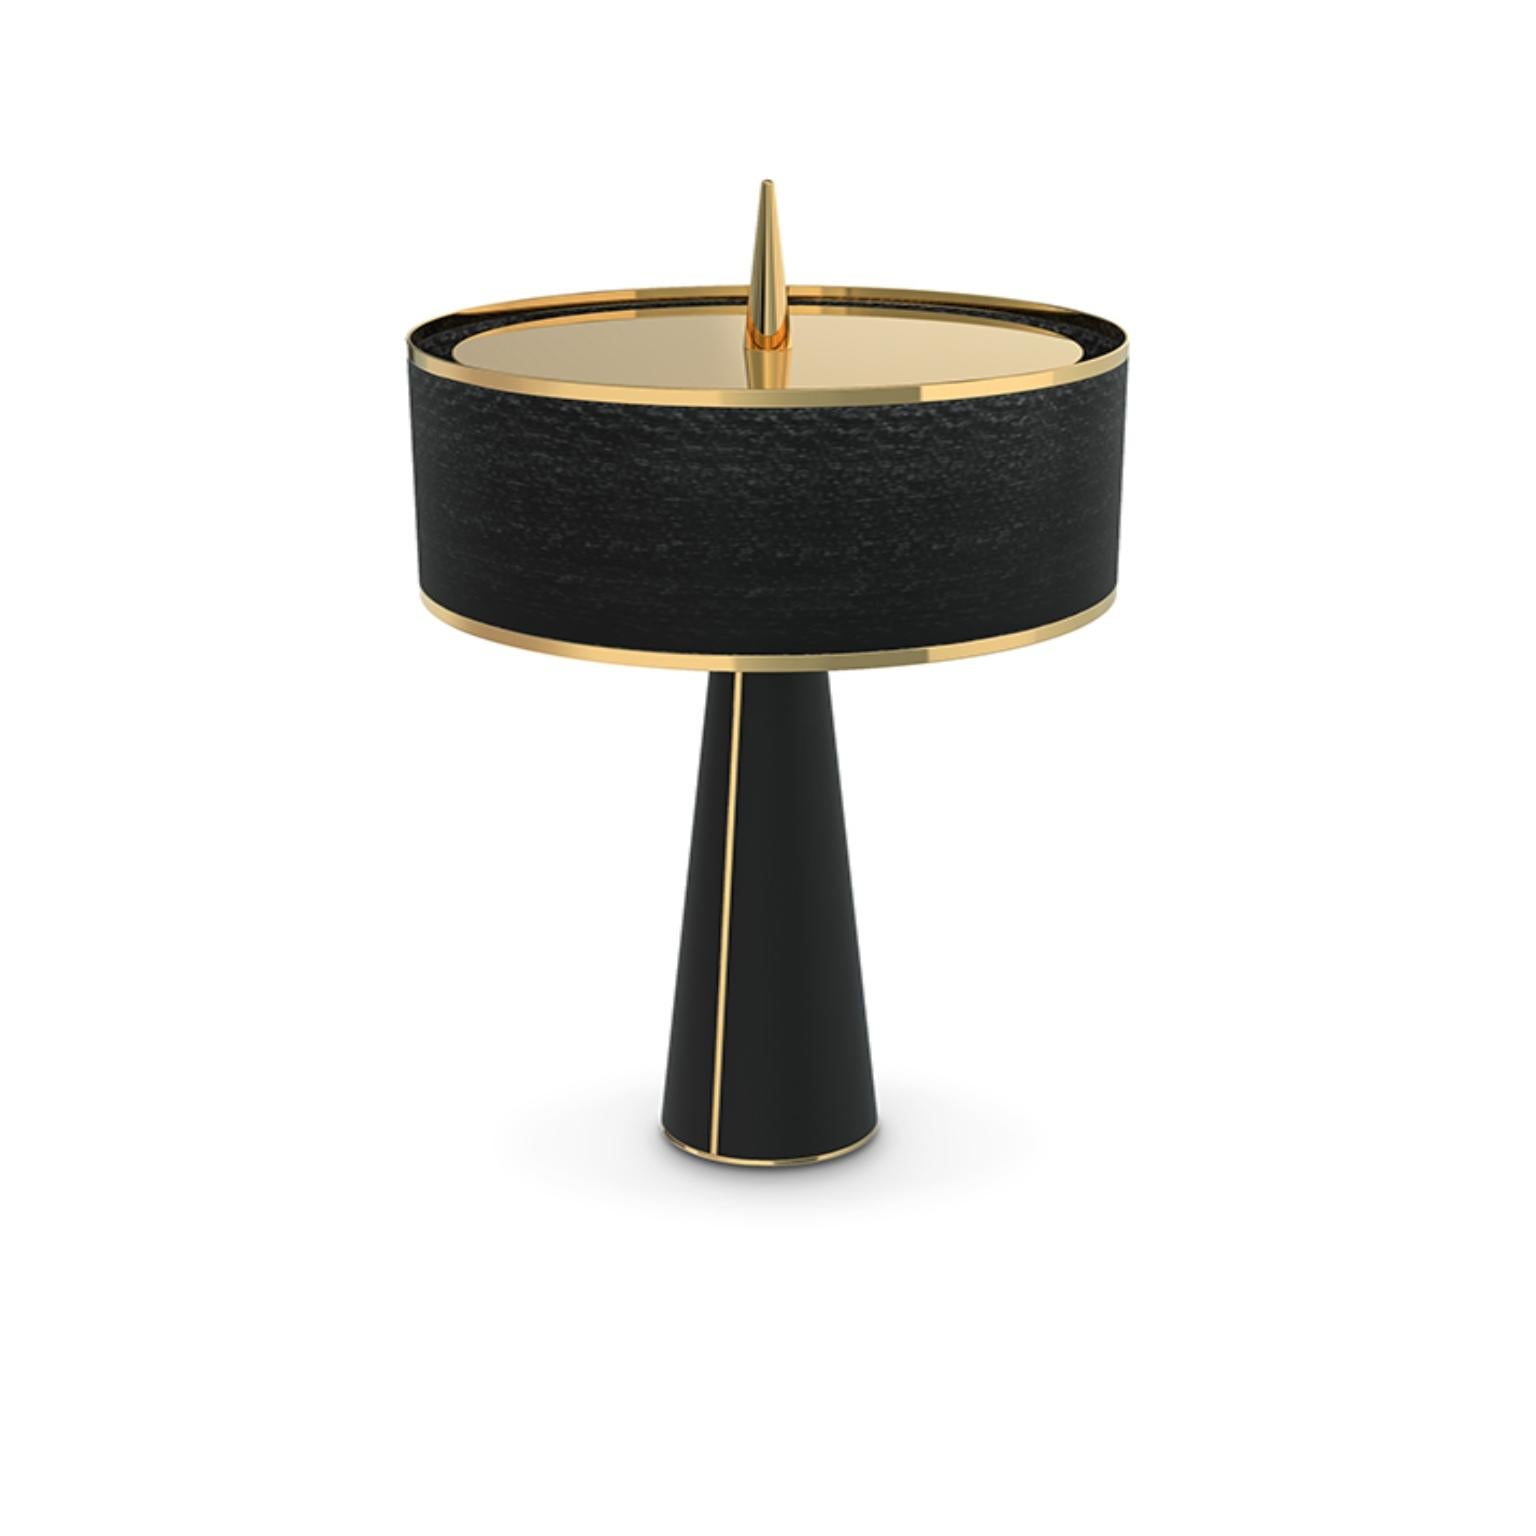 Modern Needle Brass Table Lamp by Luxxu

Modern Needle Brass Table Lamp by Luxxu is designed to be a durable, well-made lighting piece with a simple design that will never go out of style, made in gold-plated brass, black lacquered wood, and black